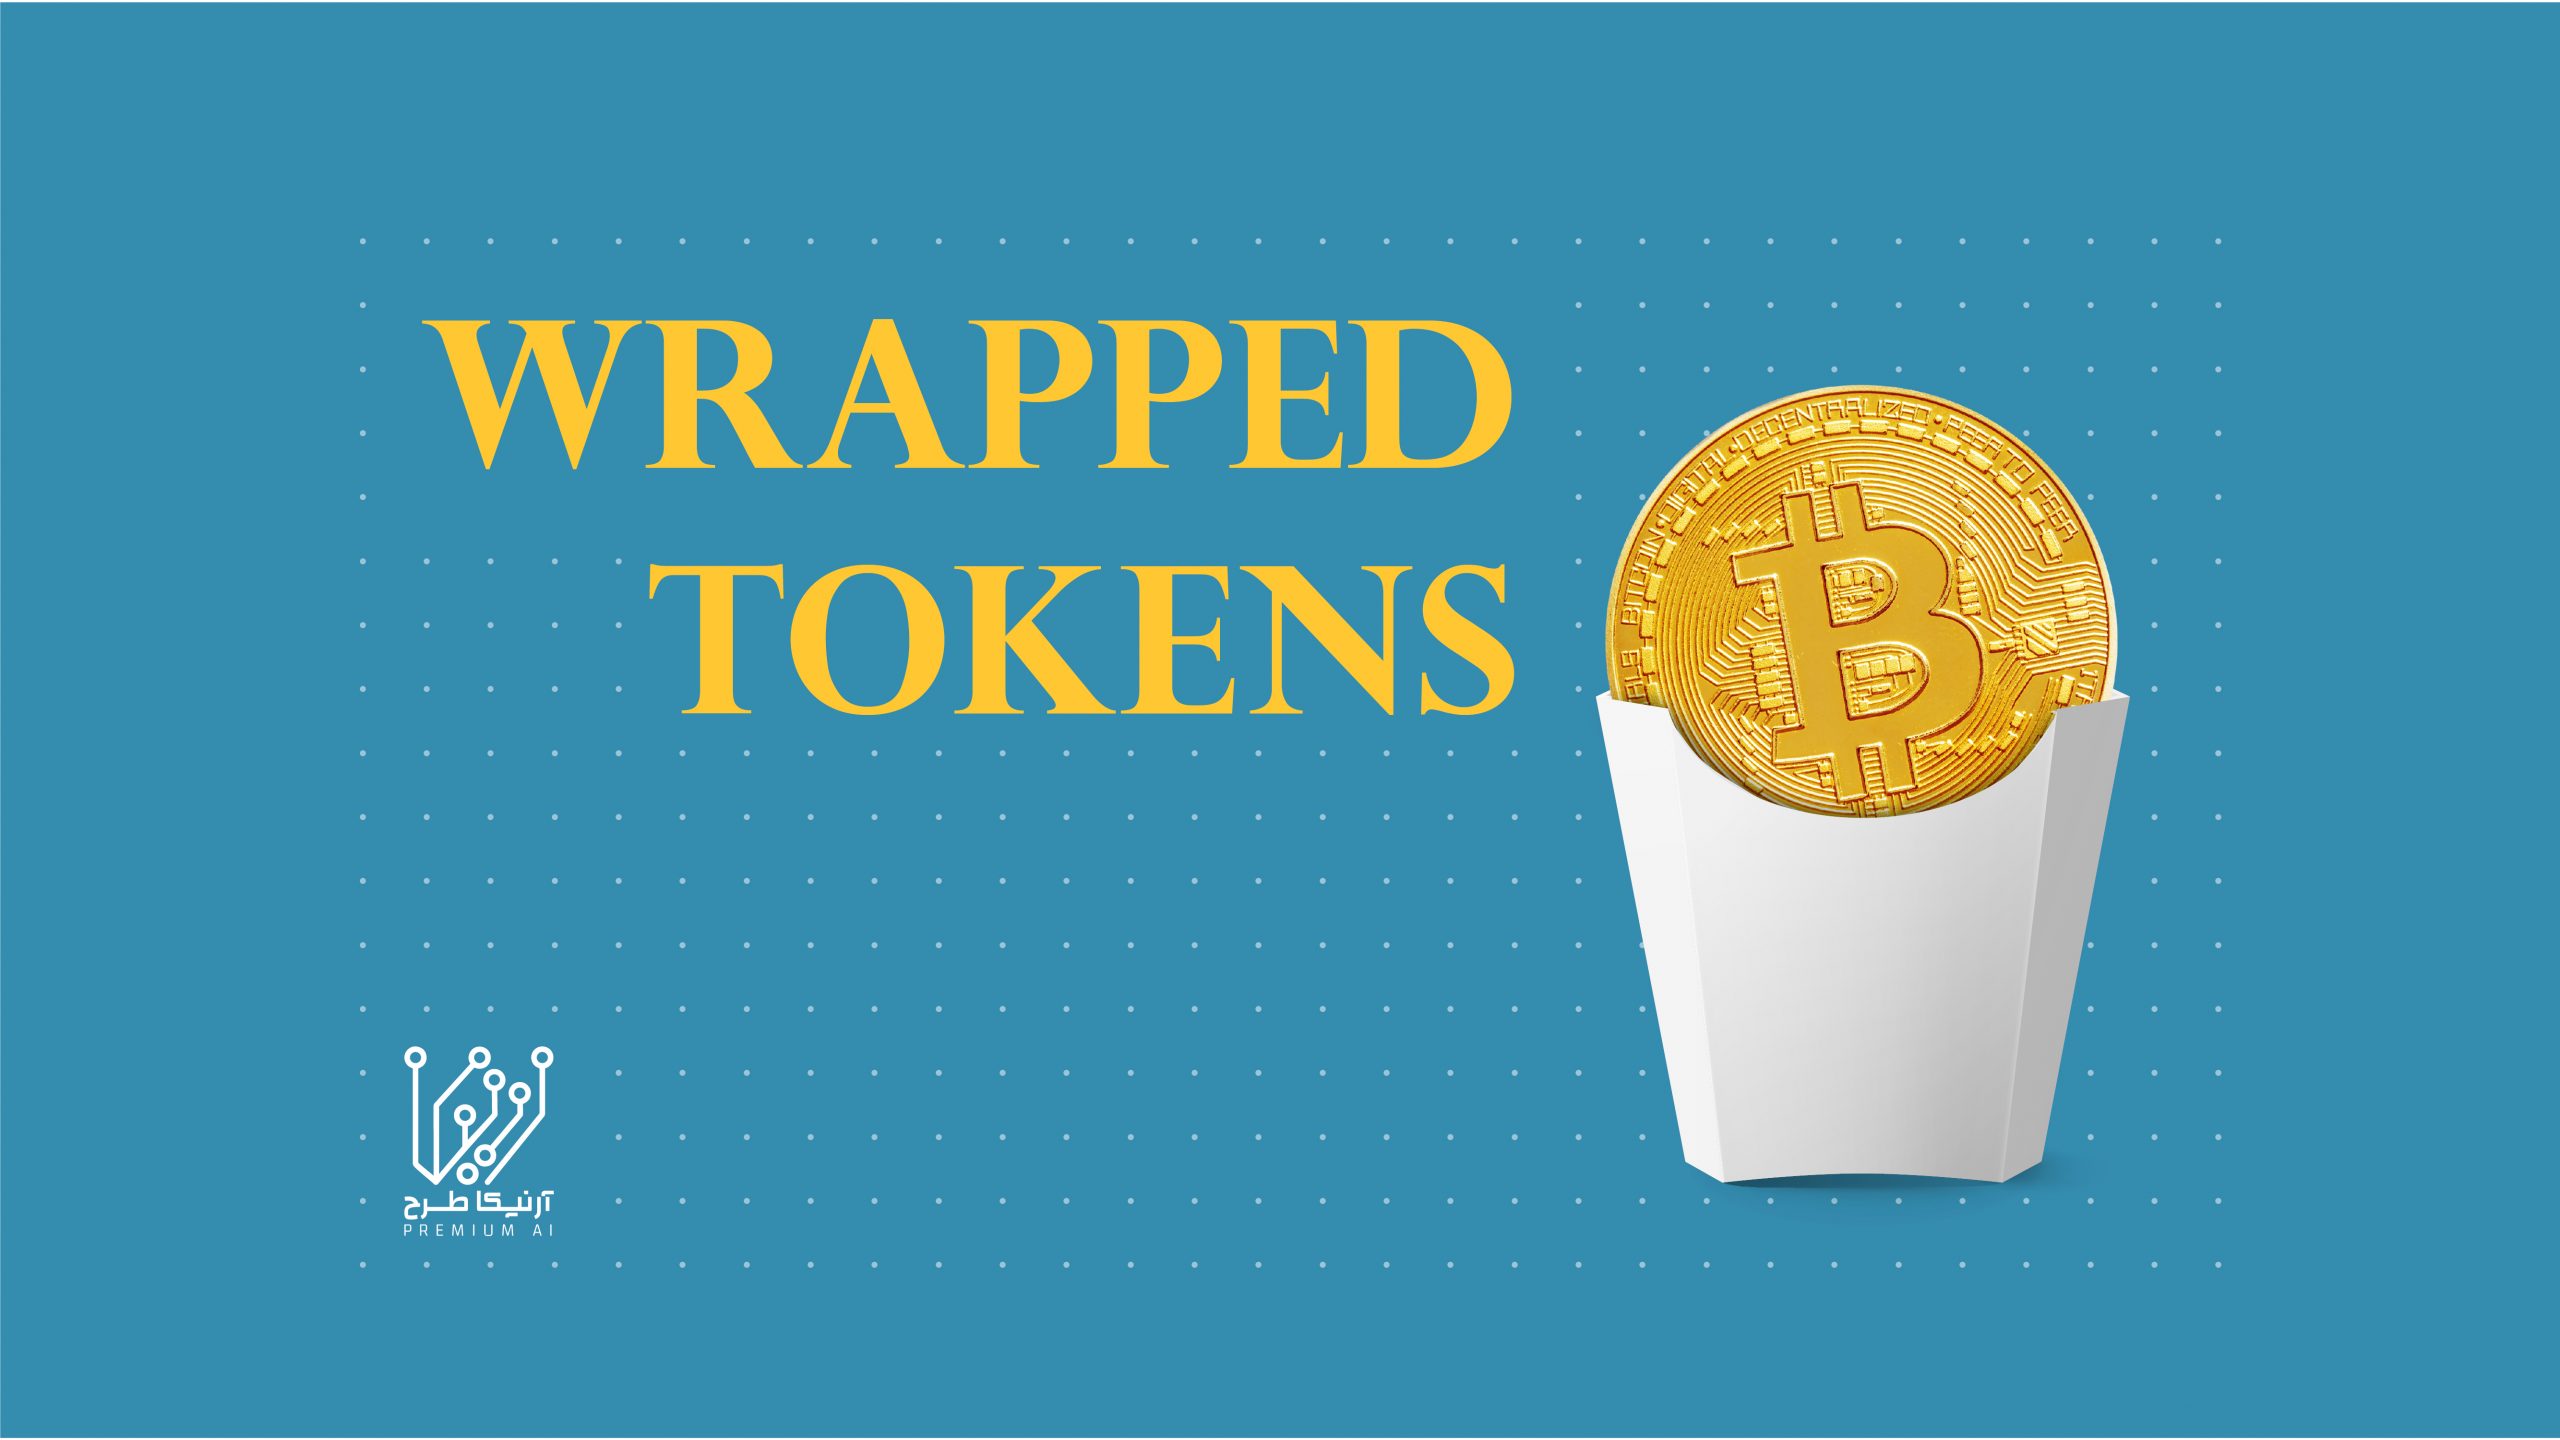 wrapped tokens